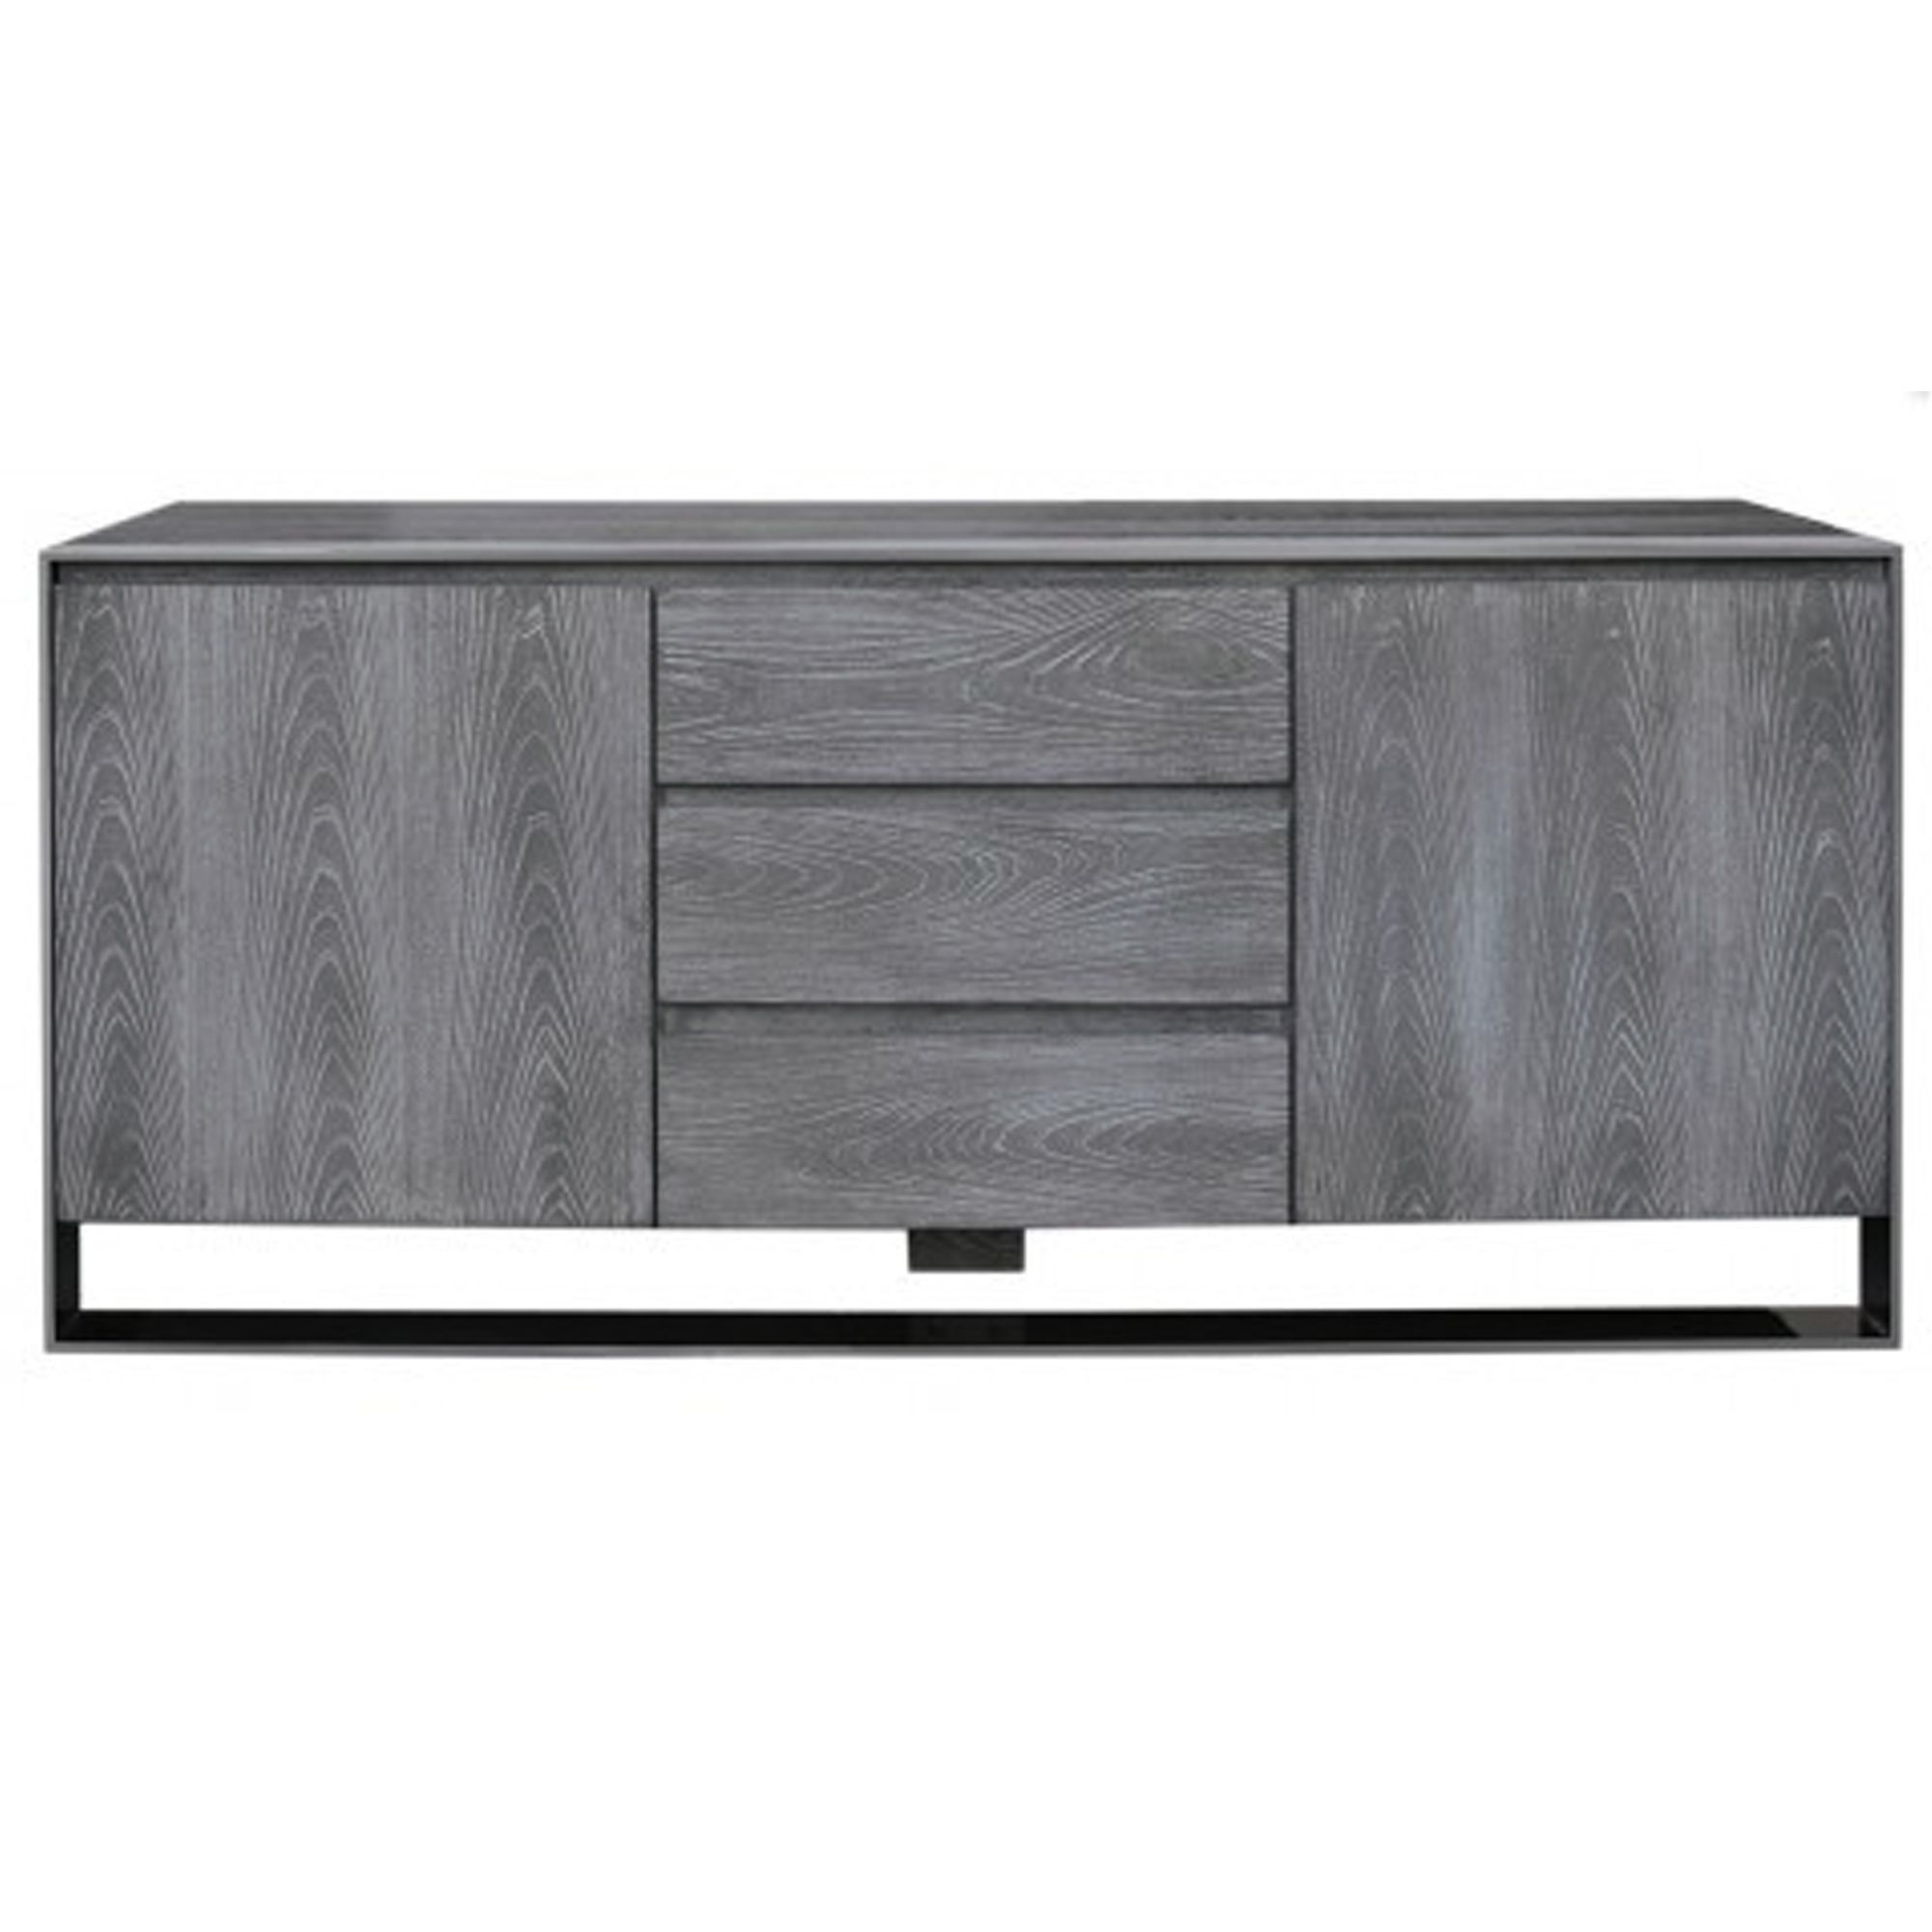 Grey Wooden Sideboard | Wooden Furniture | Sideboards Regarding Most Recently Released Gray Wooden Sideboards (View 7 of 15)